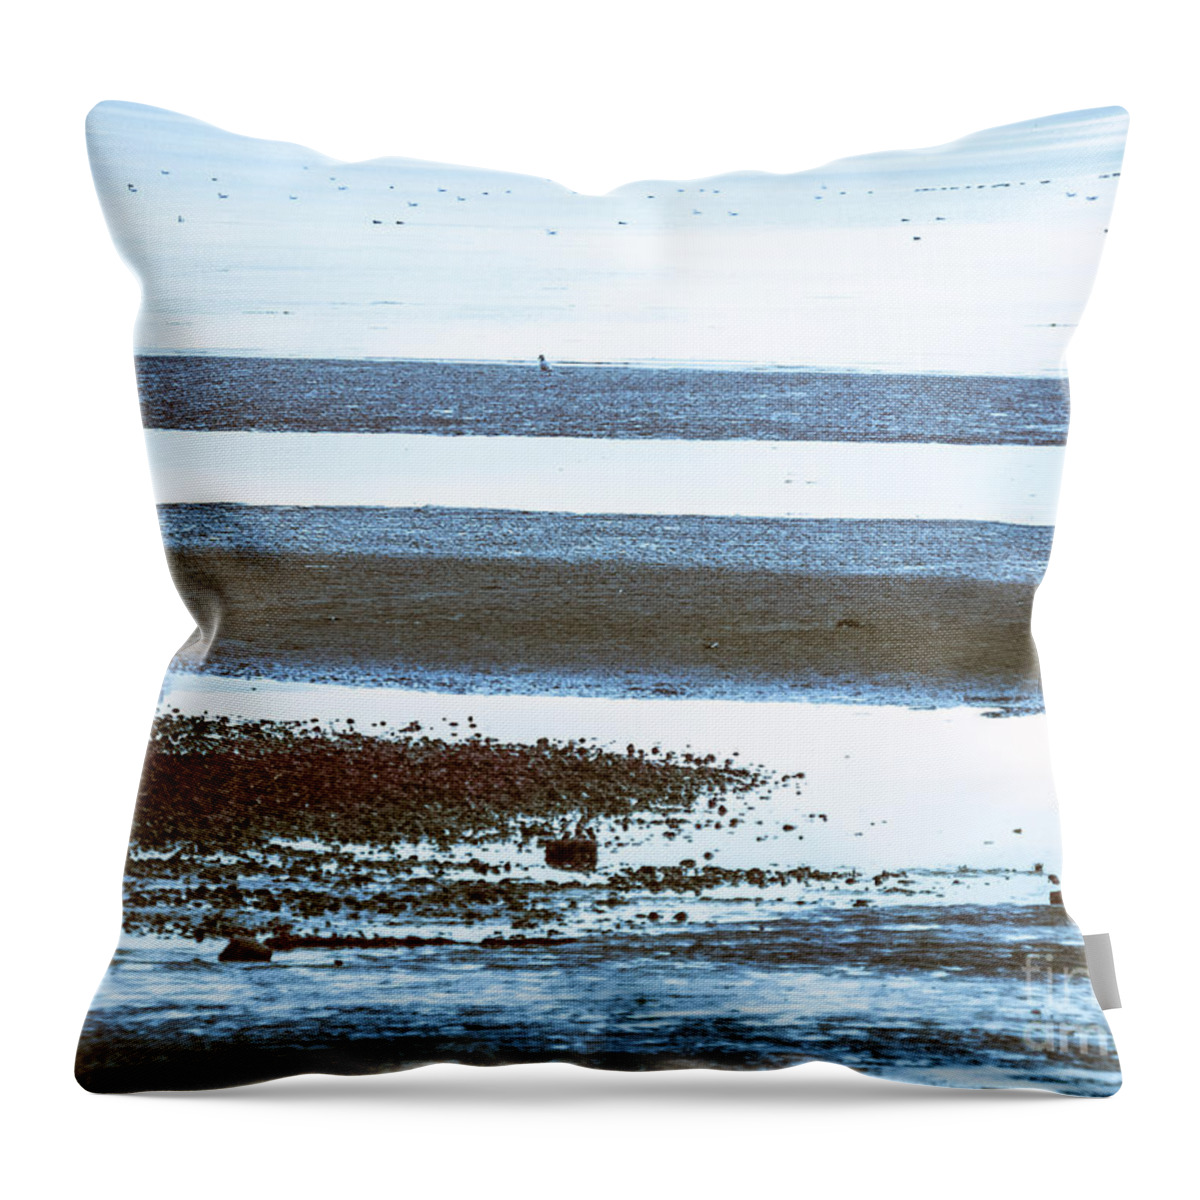 Water Throw Pillow featuring the photograph F2131021 by David Fabian